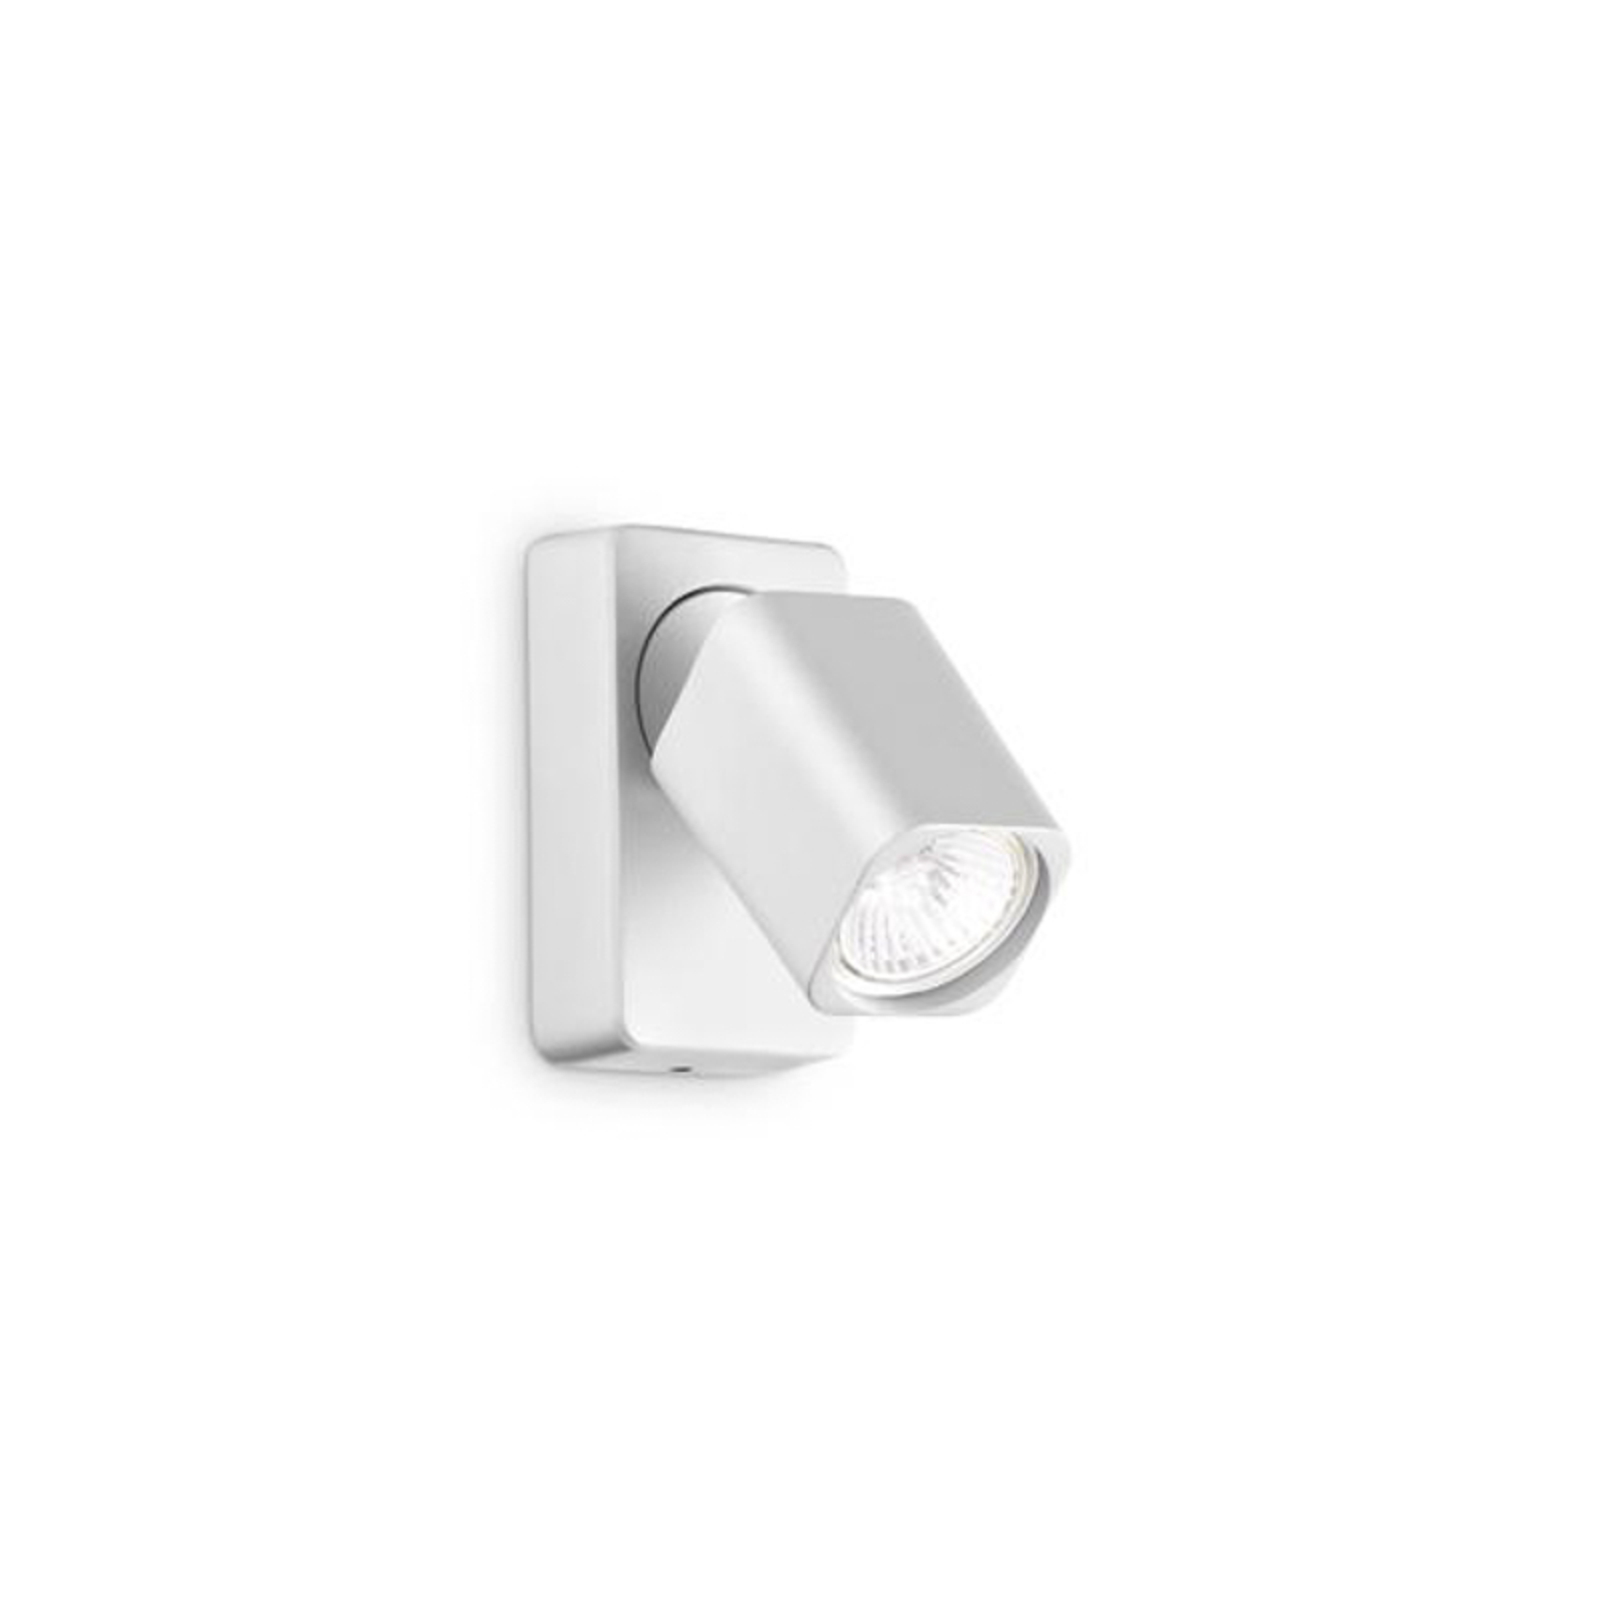 Ideal Lux Rudy Square wall spotlight, white, 1-bulb, metal